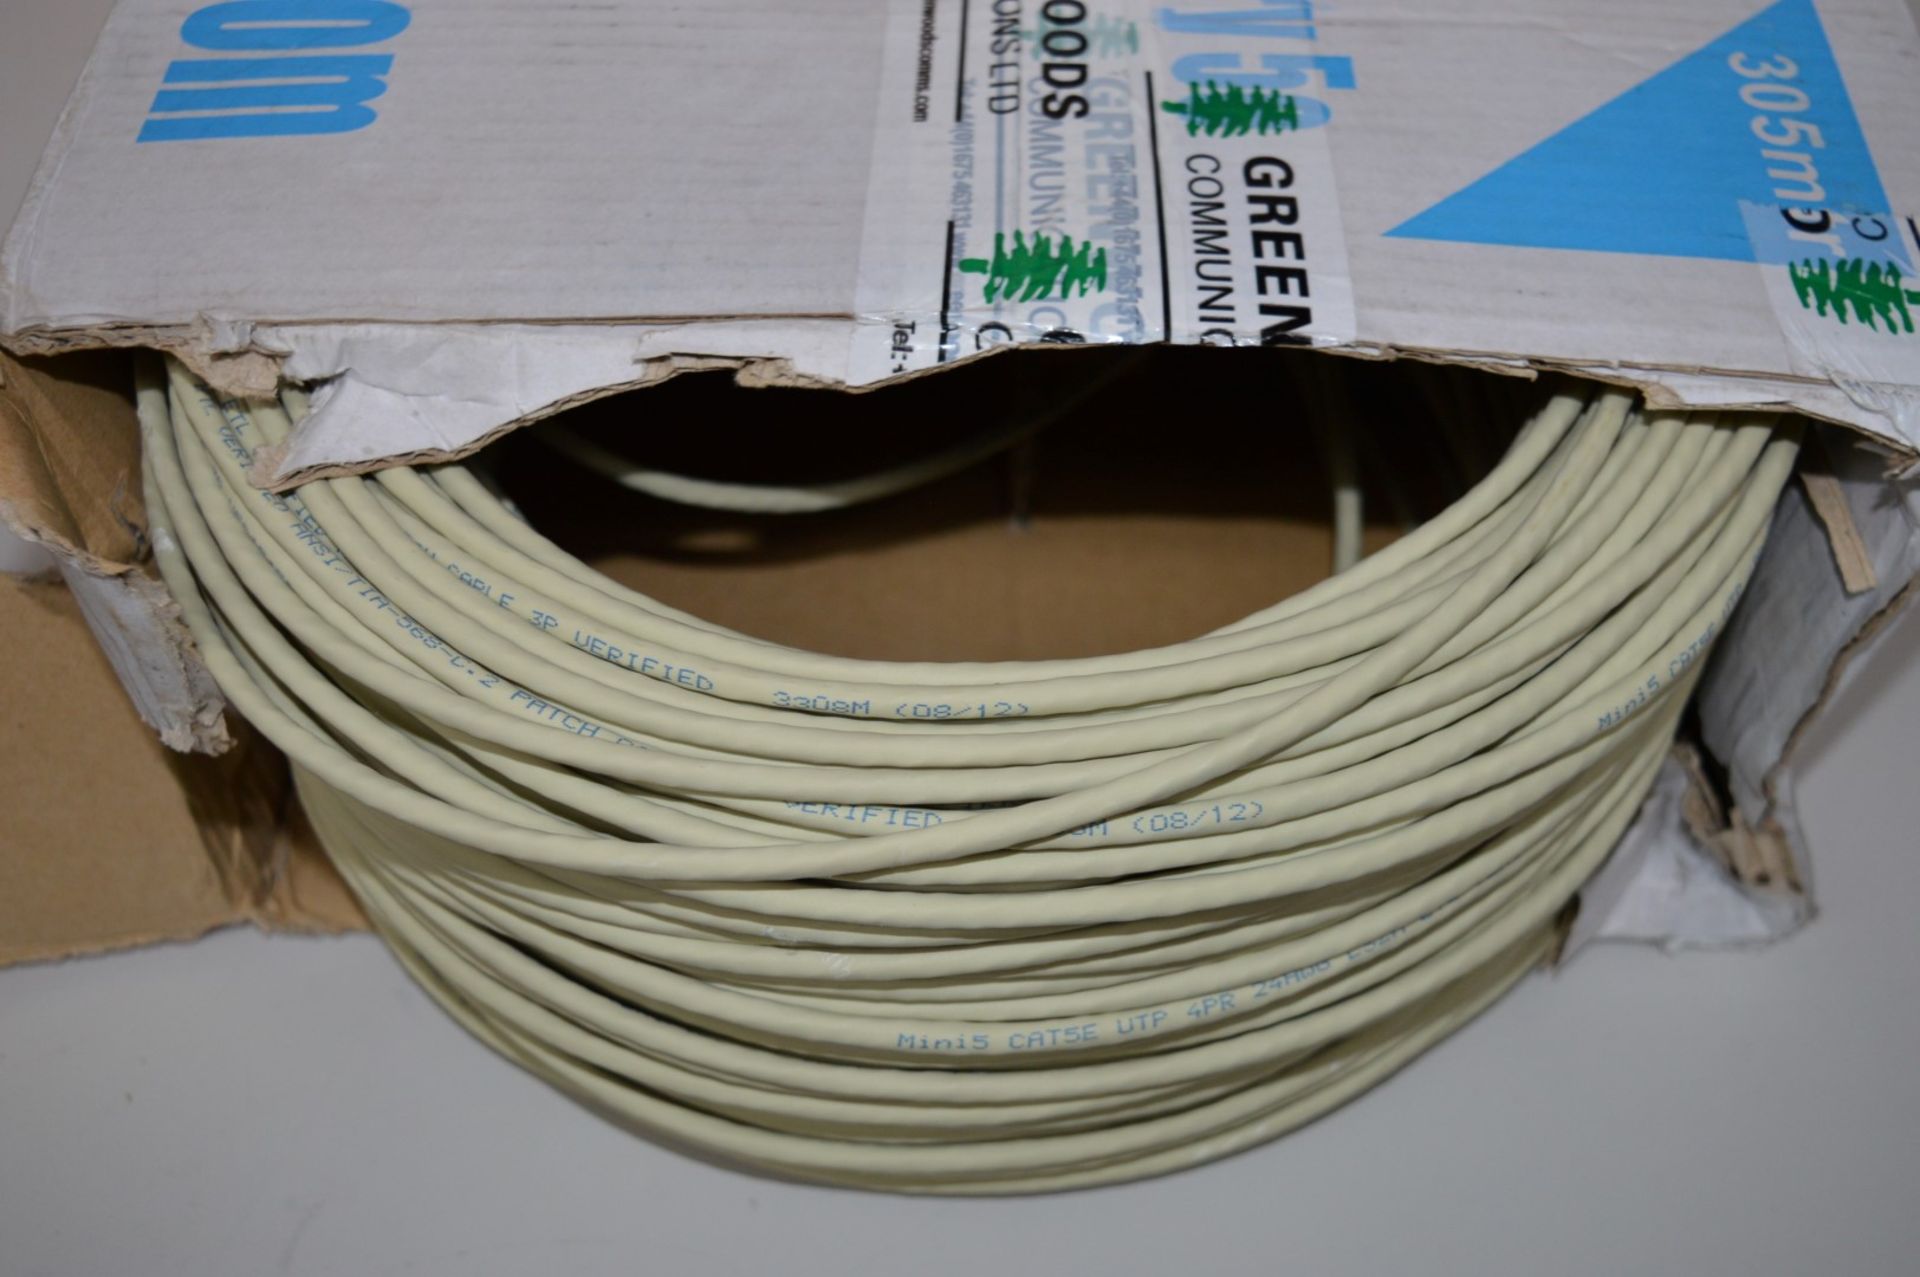 1 x Box of Mini5 Category 5e FTP LSOH Patch Cable - Part Used Box With Large Quantity Included - Box - Image 2 of 4